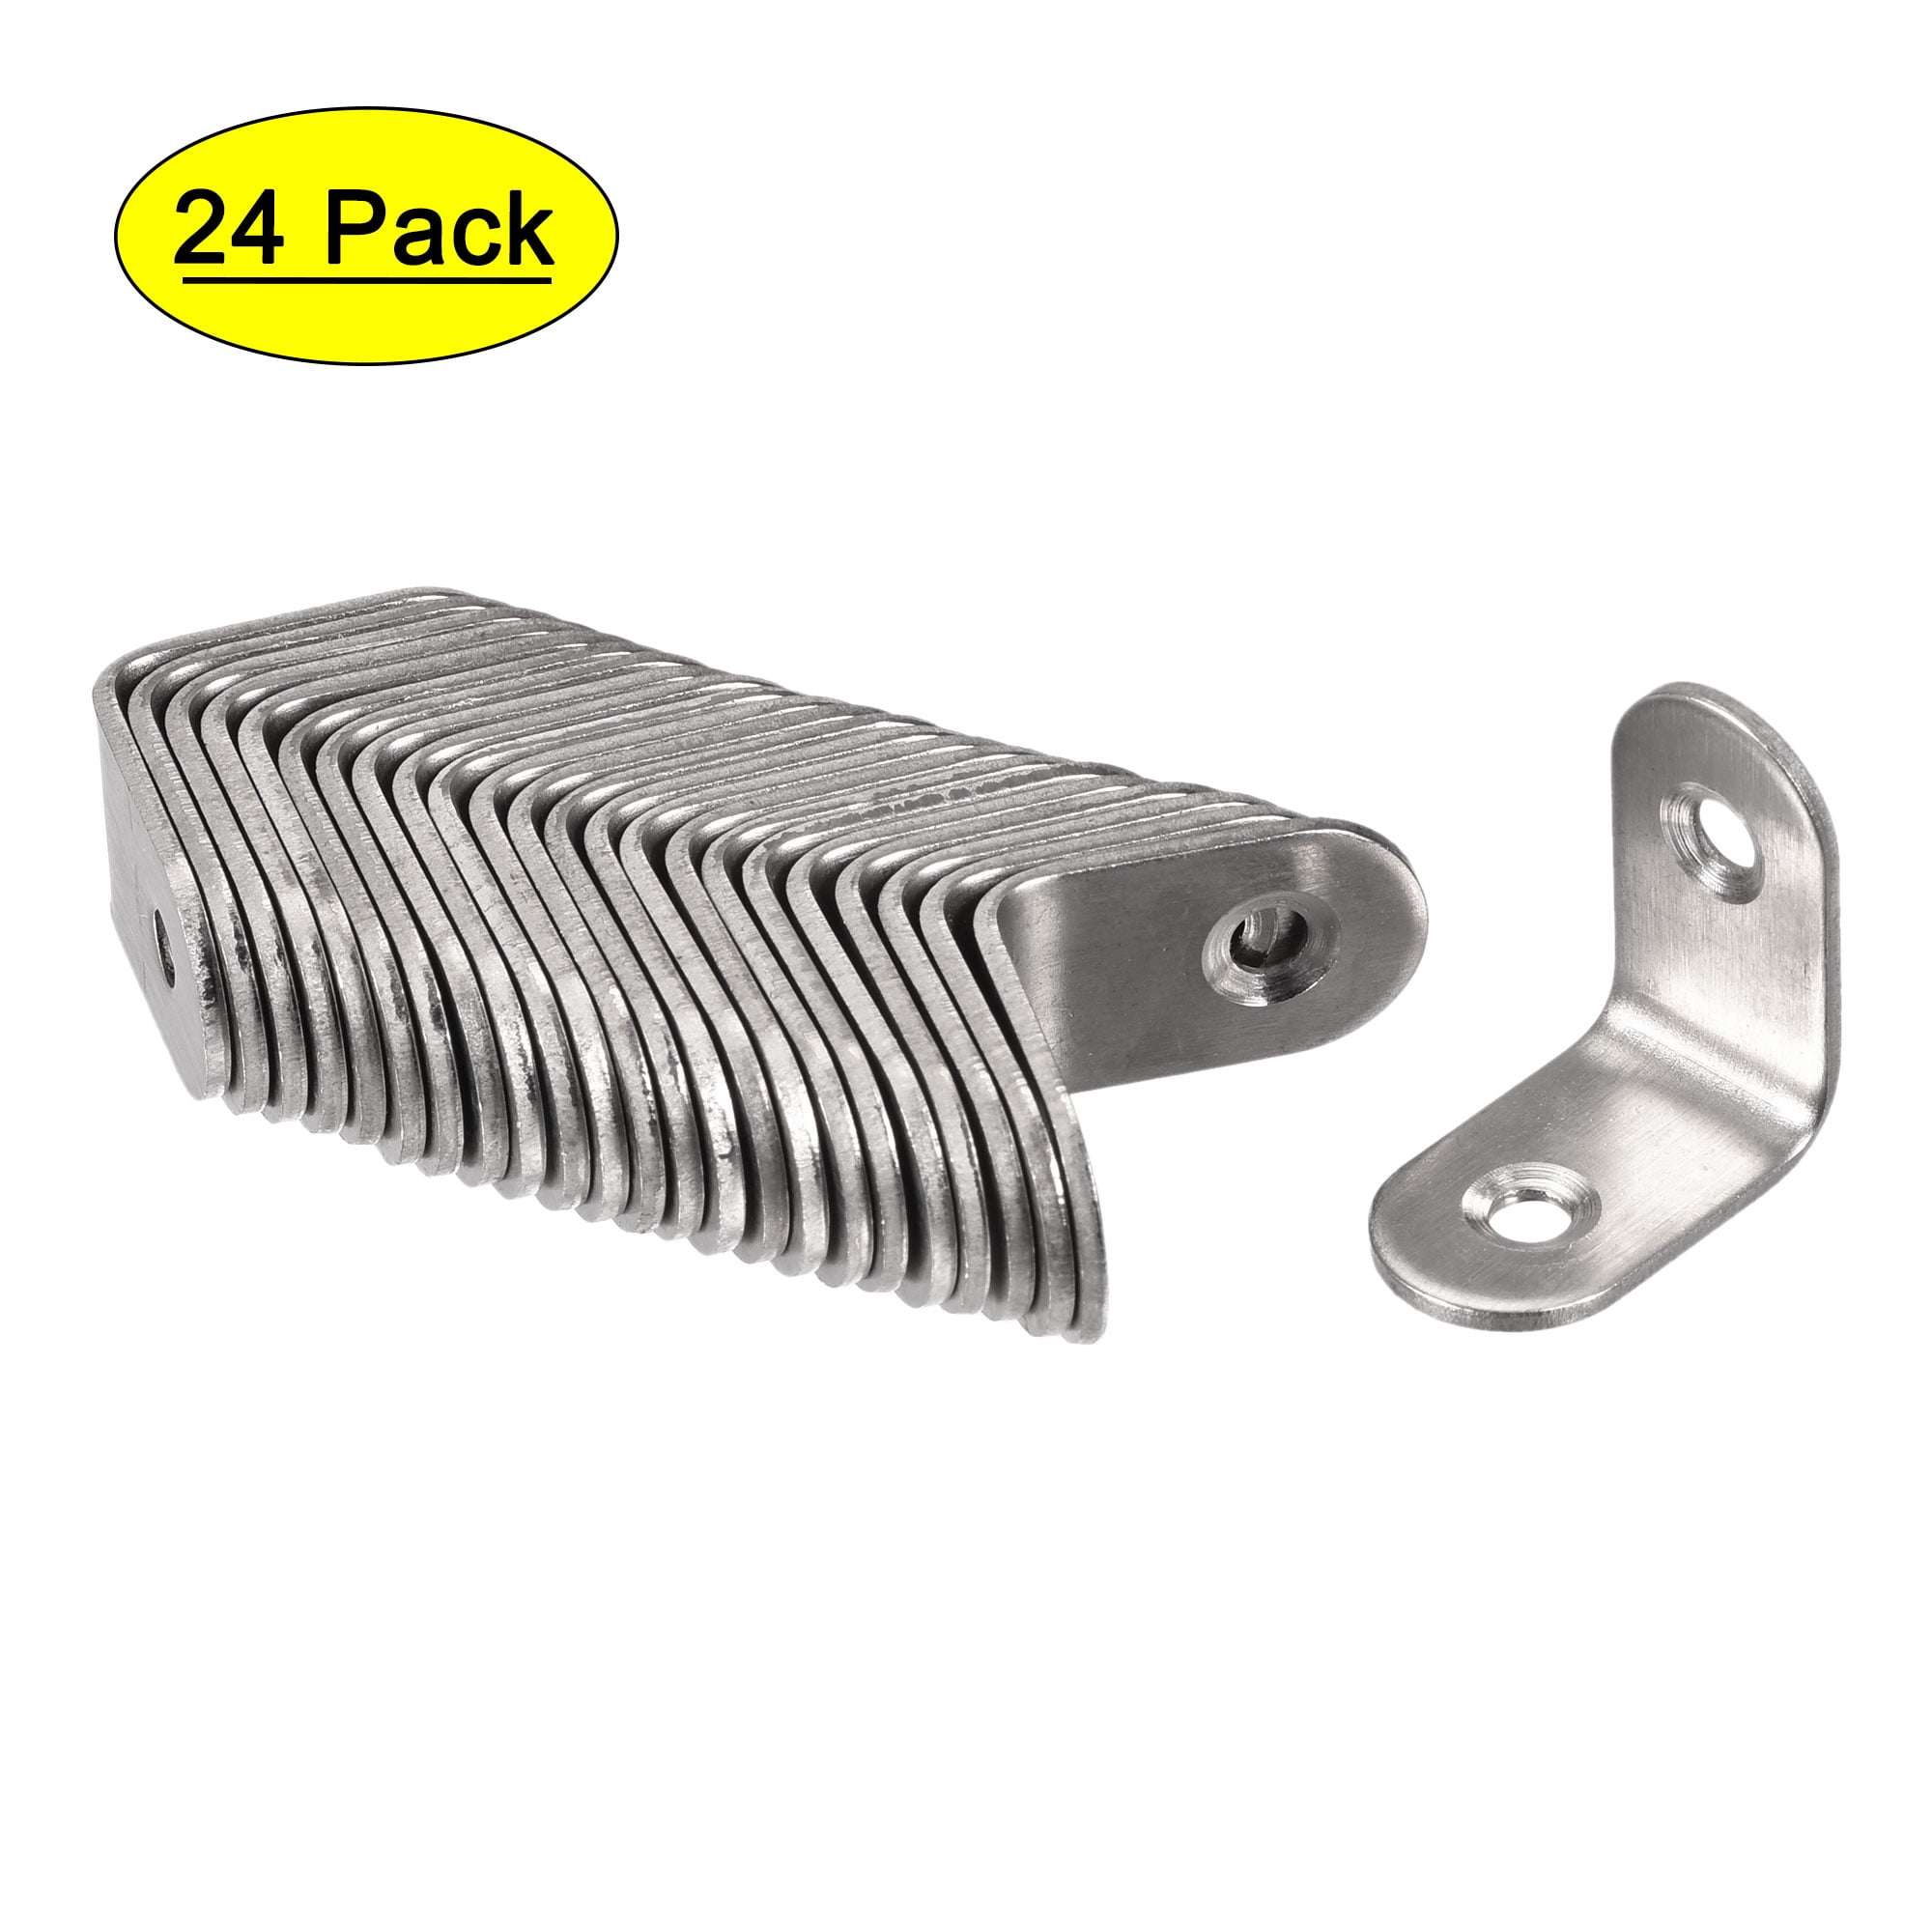 175mm x 100mm x 45mm Heavy Duty Metal 4 Pack Stainless Steel 90 Degree Angle L Shaped Bracket,Corner Brace Joint Bracket Fastener 5 Holes Sliver Tone Round End